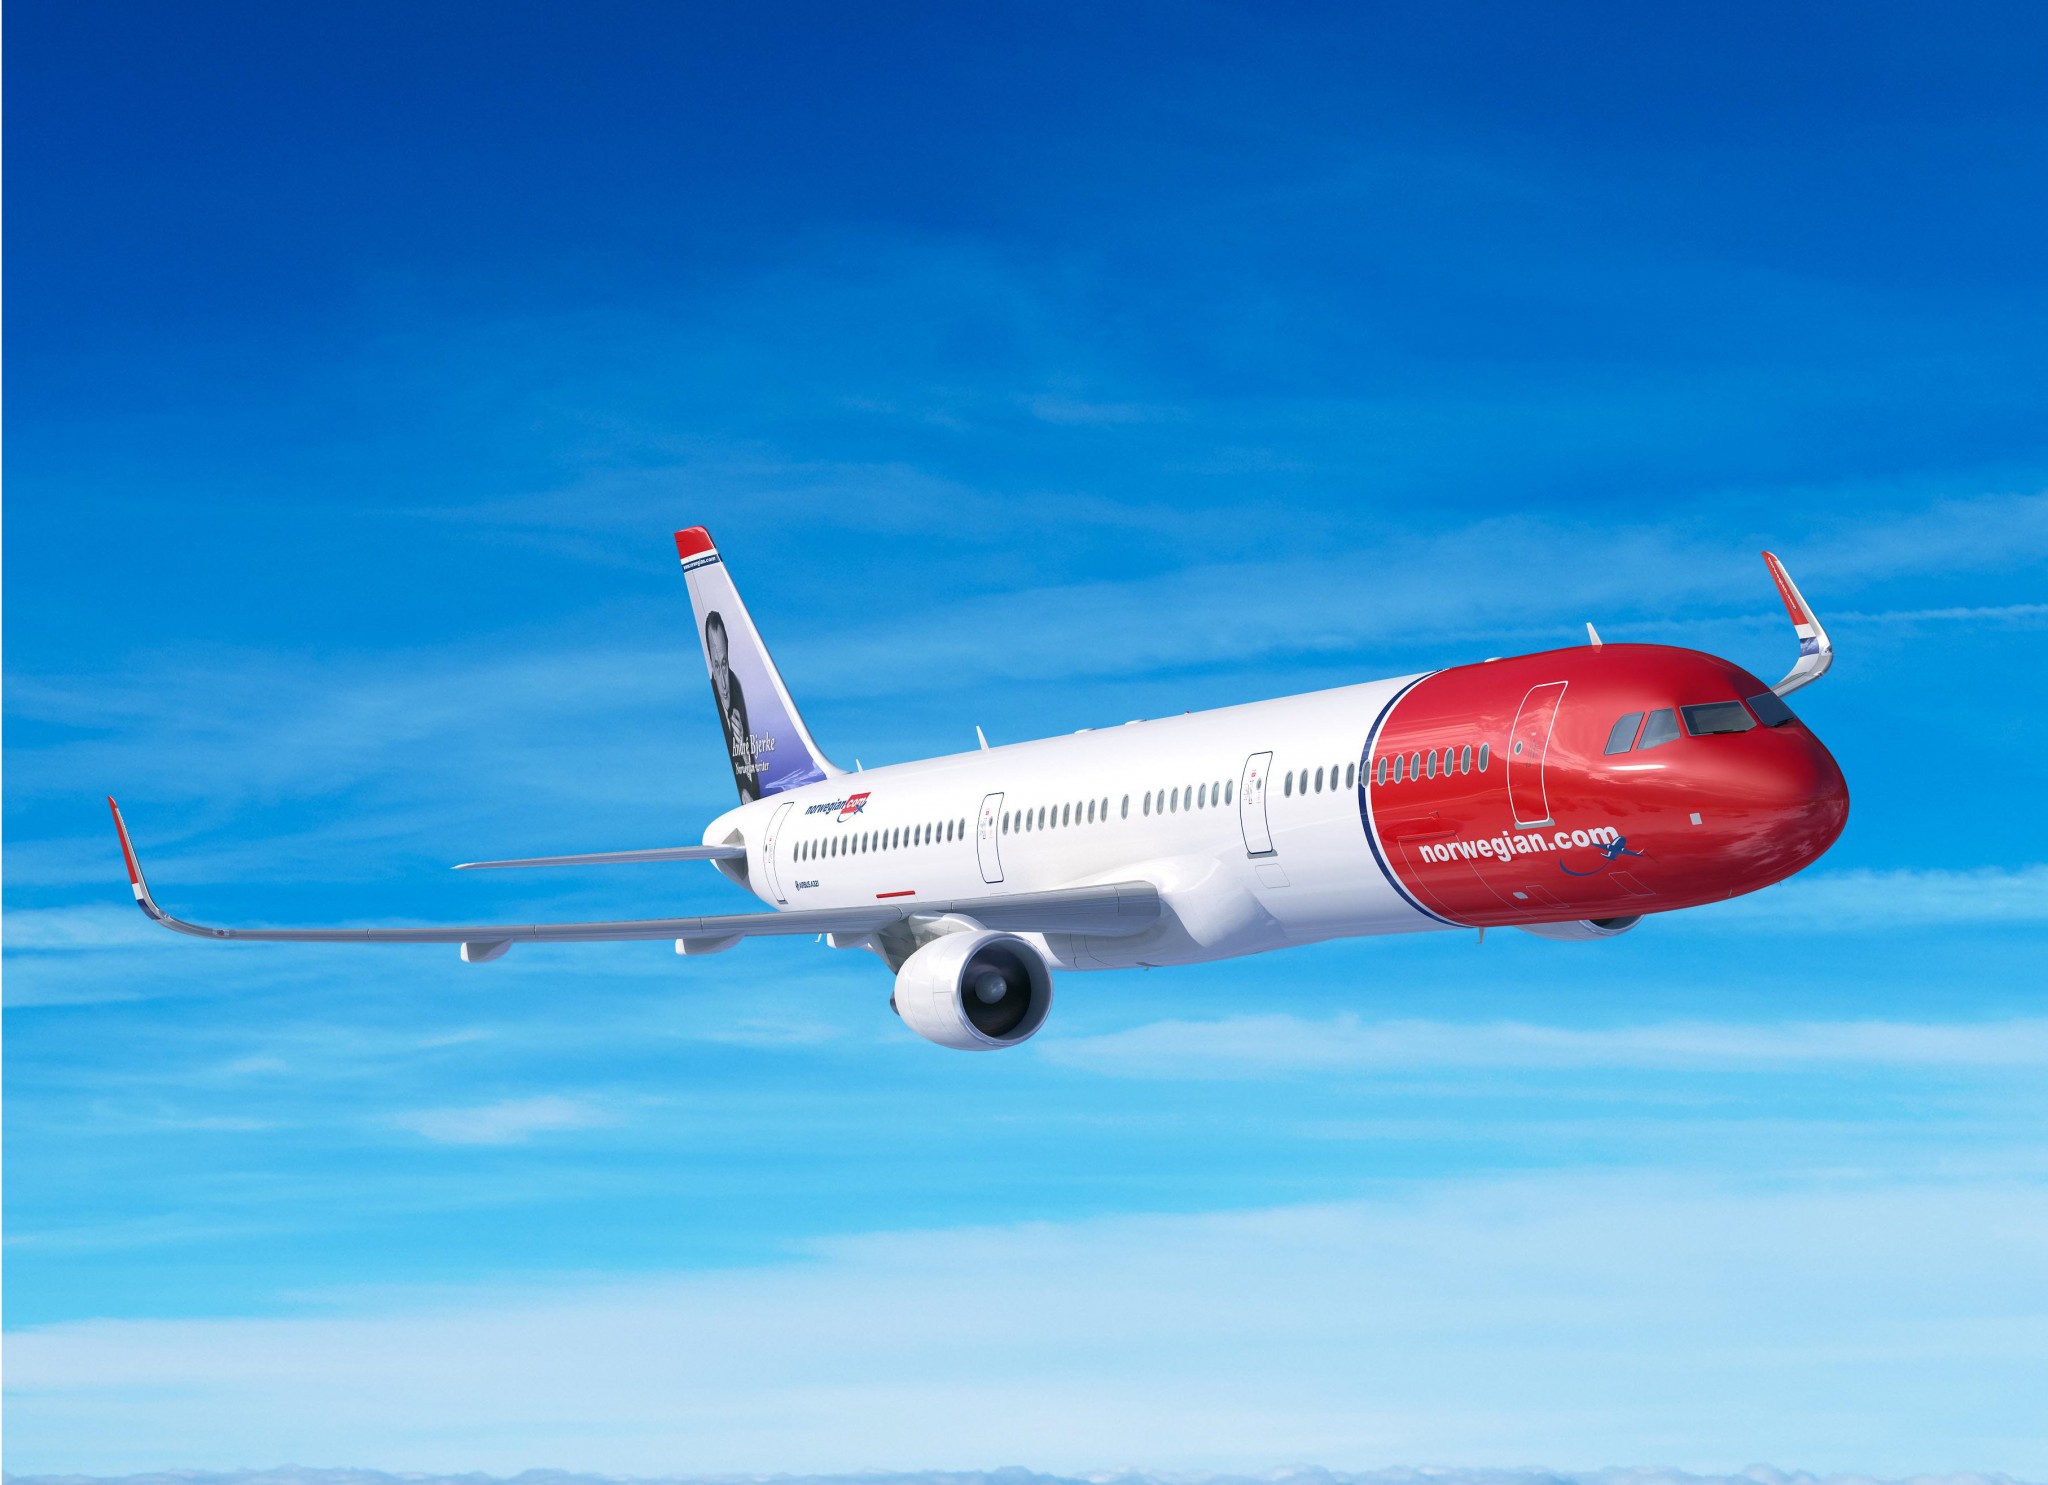 Norwegian announces new low-cost flights from London Gatwick to Iceland and Lapland